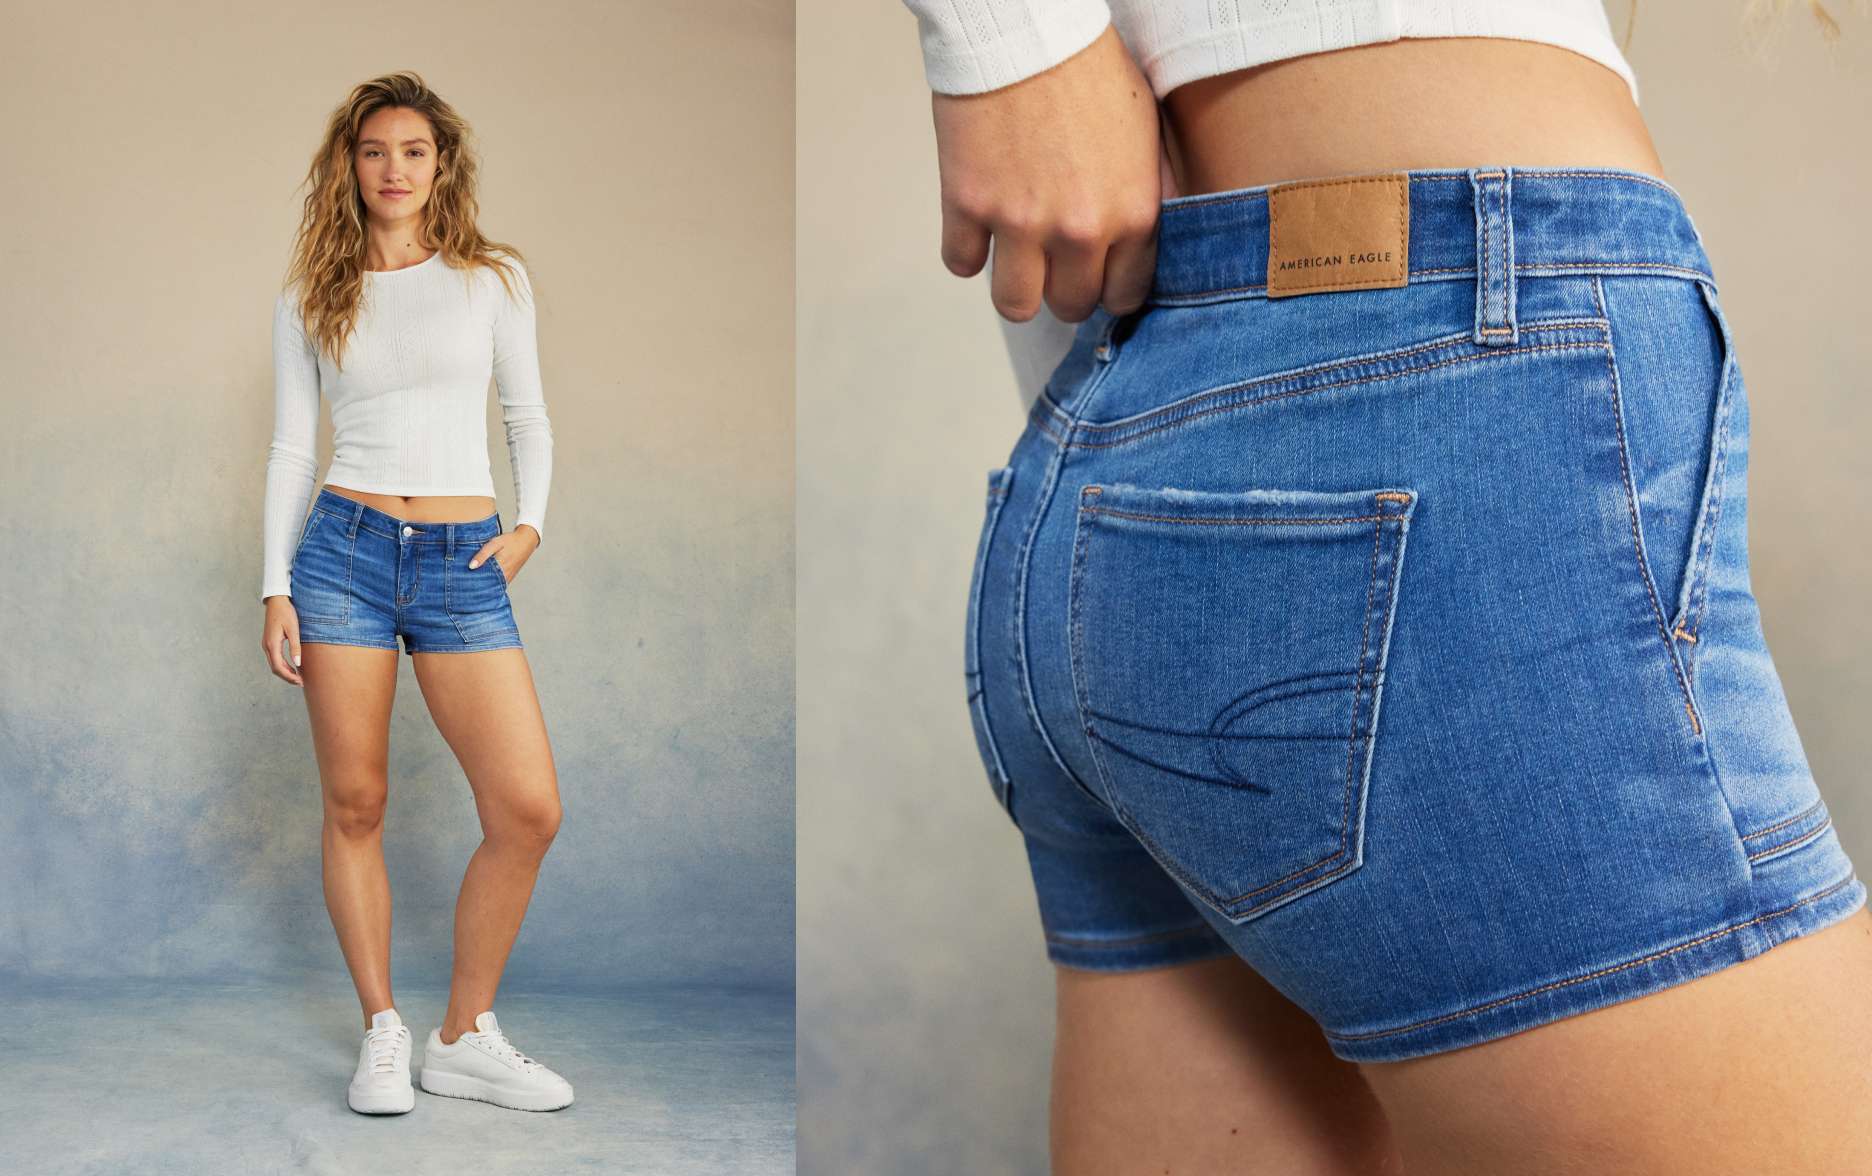 model in denim shorts and white long sleeve top